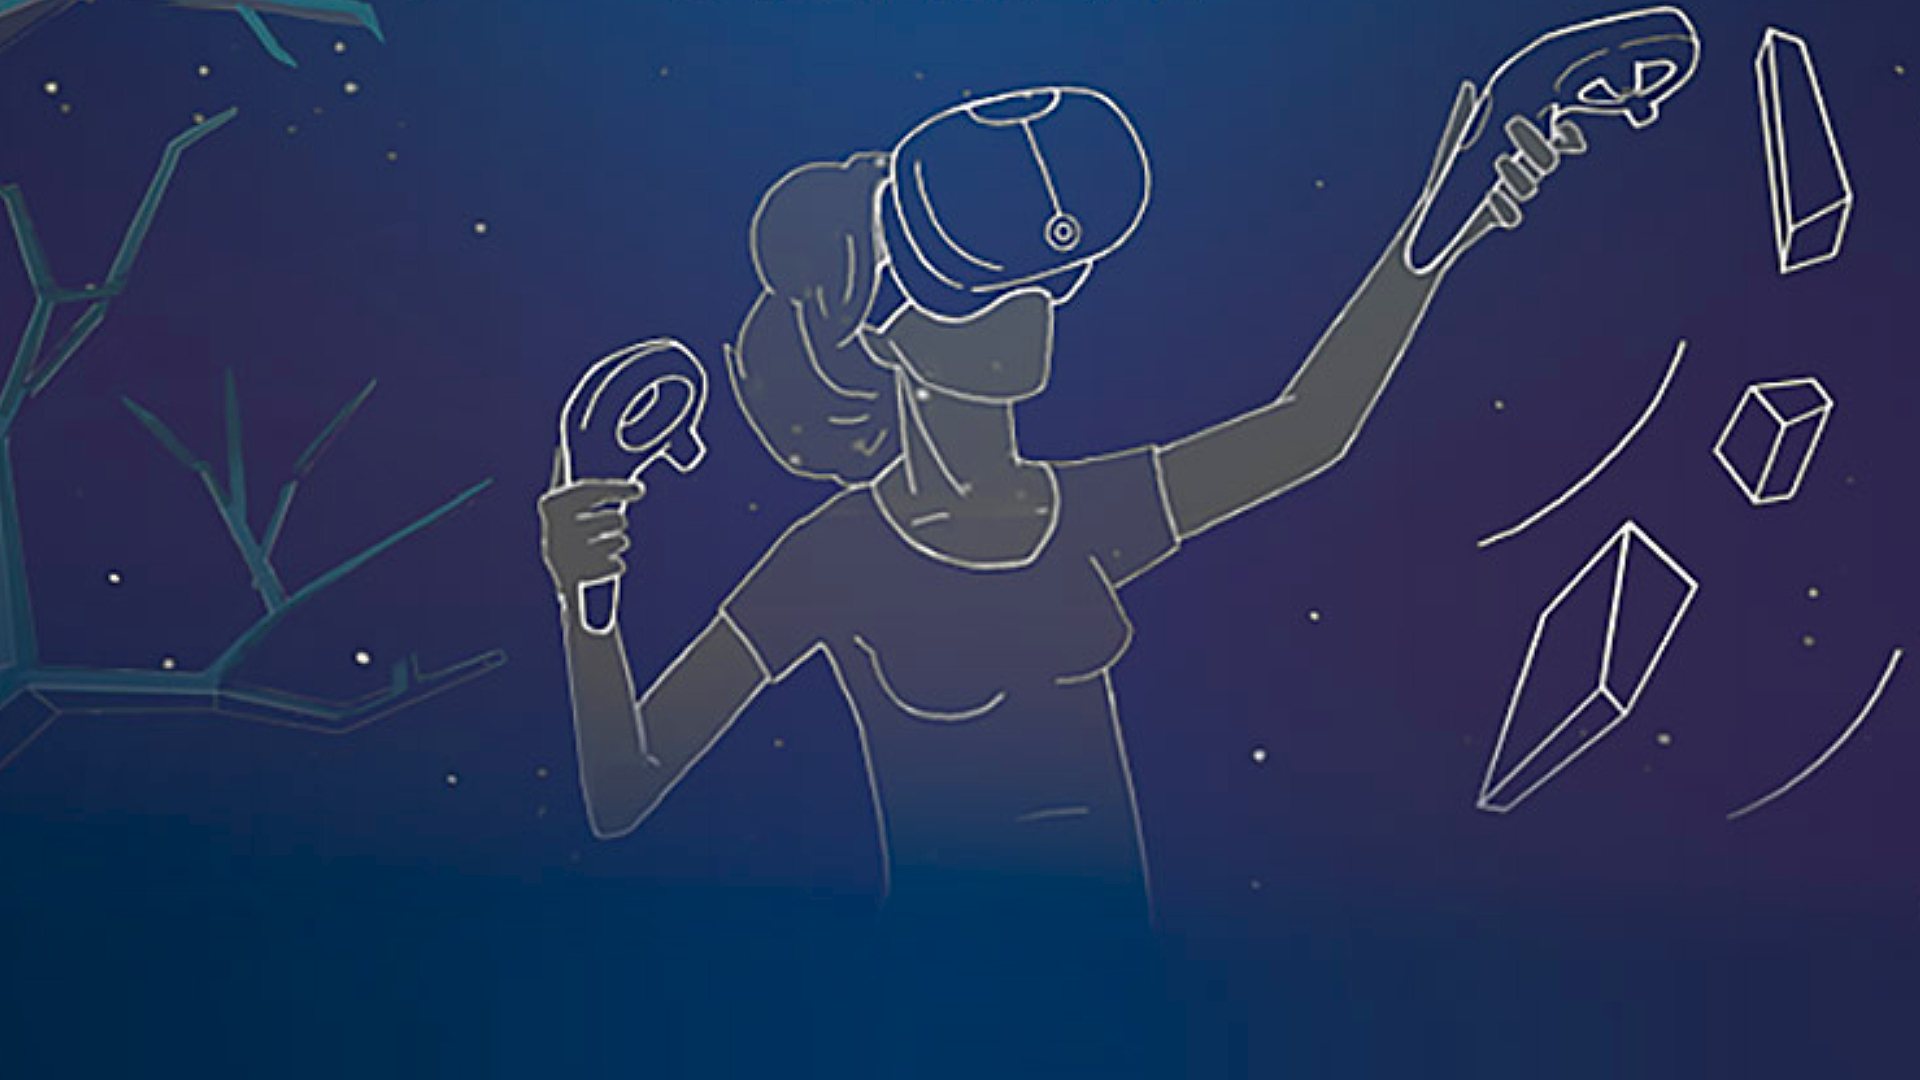 Oculus Quest 2: SteamVR artwork with femme presenting outline illustration of user playing with headset